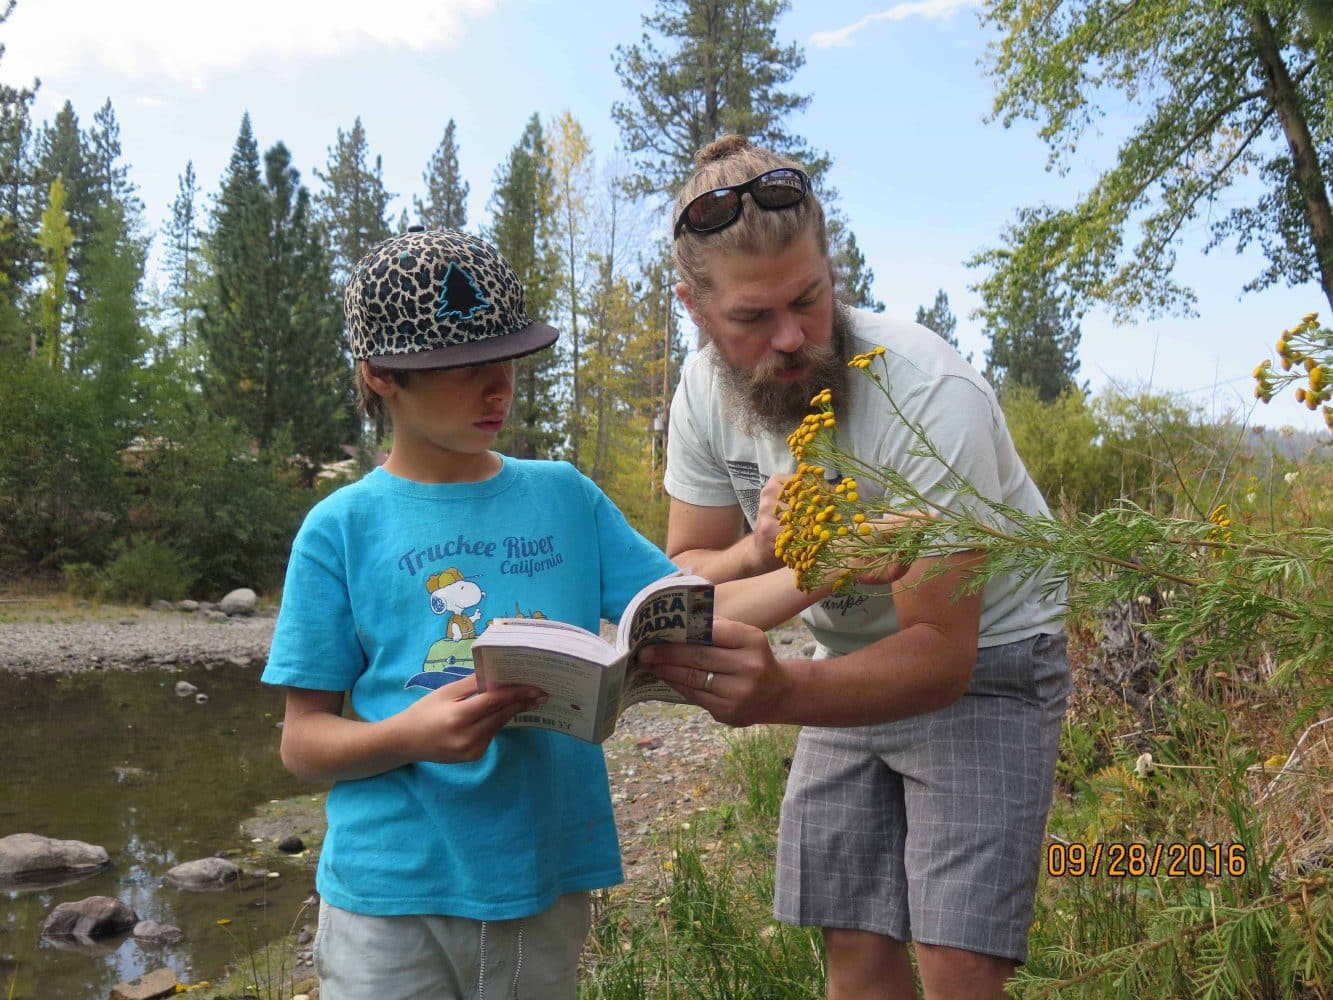 4th grader with his teacher at the truckee river